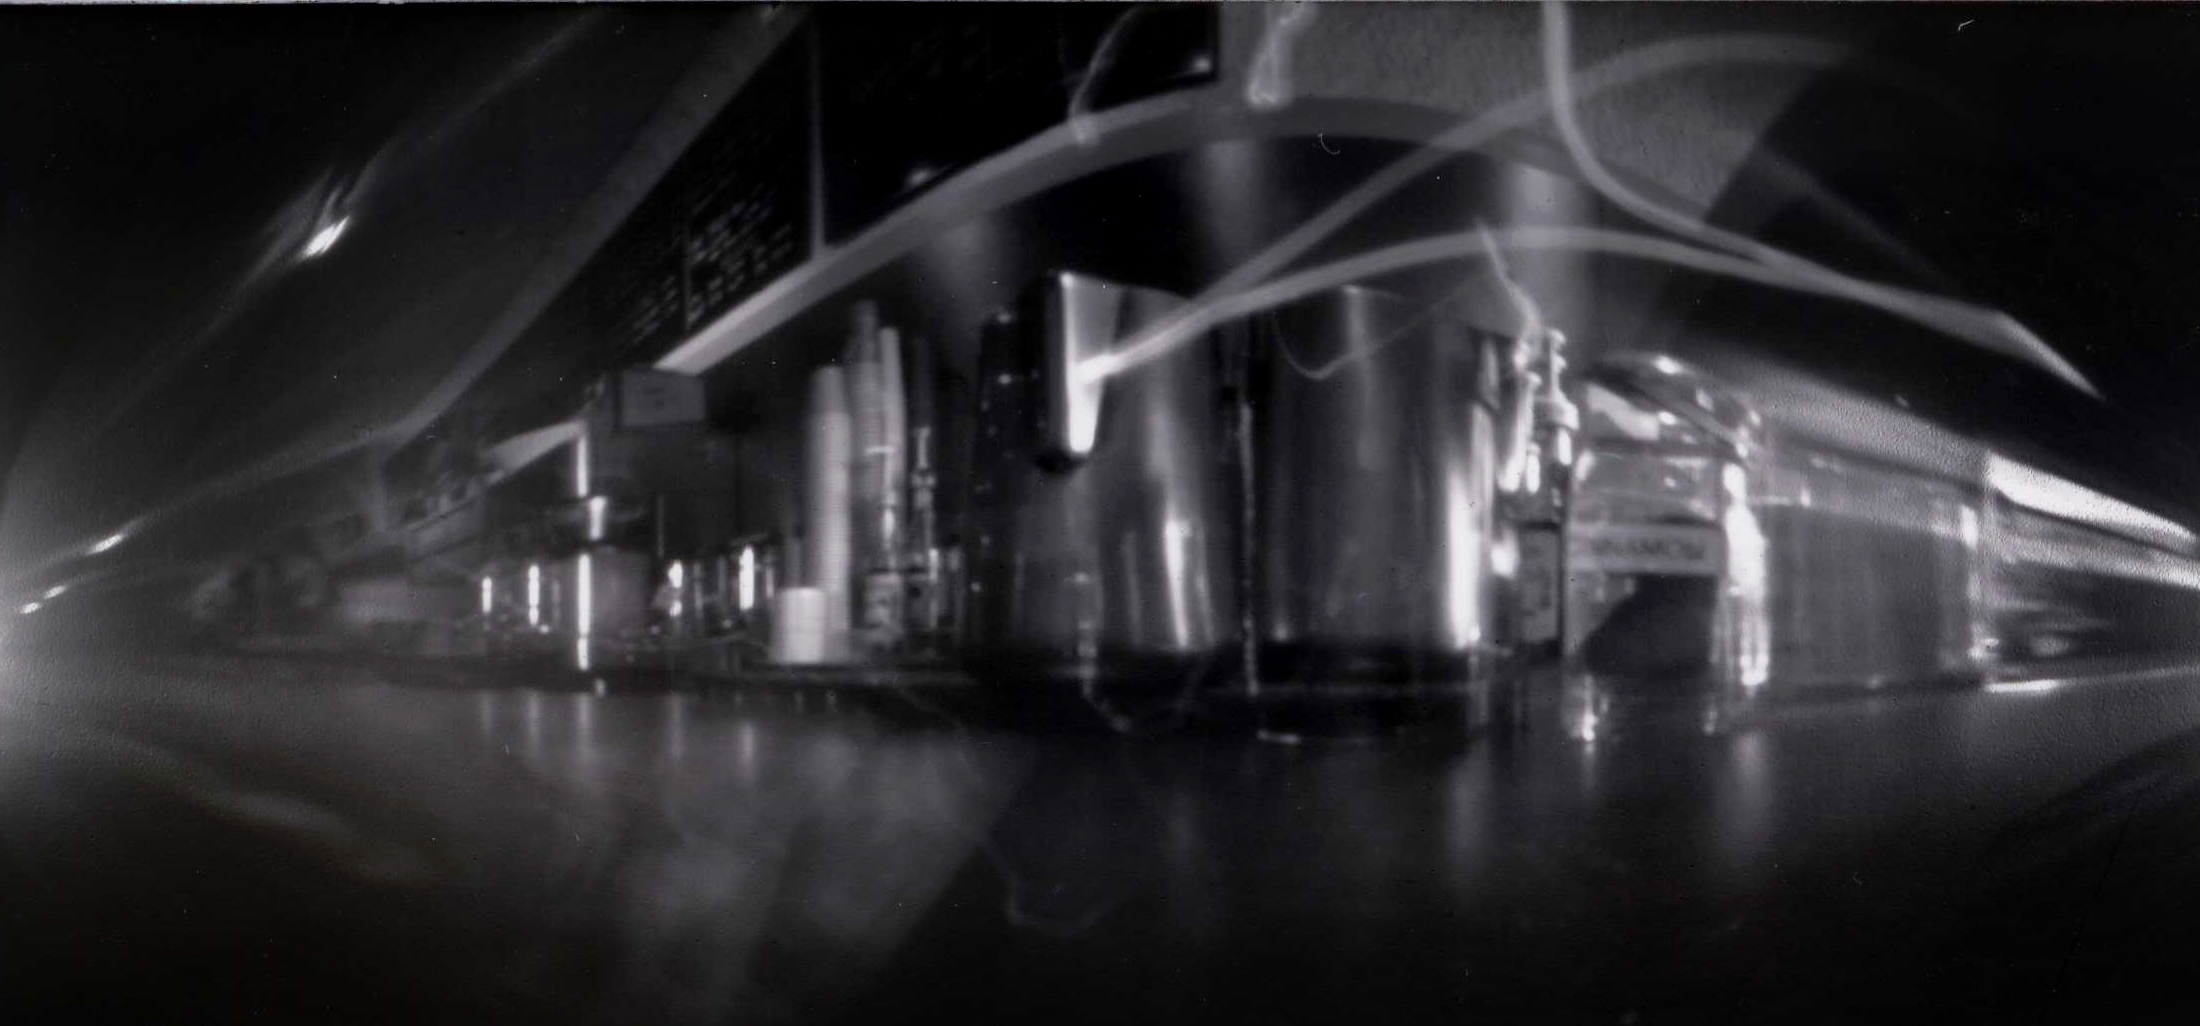 a black and white pinhole camera photograph with a large amount of curvature distortion except at the center of the image; this is a photograph of the stainless steel milk pitchers sitting on a barista’s counter in a coffeeshop; most of the image is too distorted to discern except for the milk pitchers but there are stacks of cups, the espresso machine, and the menu boards to the left and a shakers of cinnamon to the right; there are trails of light showing that during the exposure of the image, the milk pitchers were moved by the barista